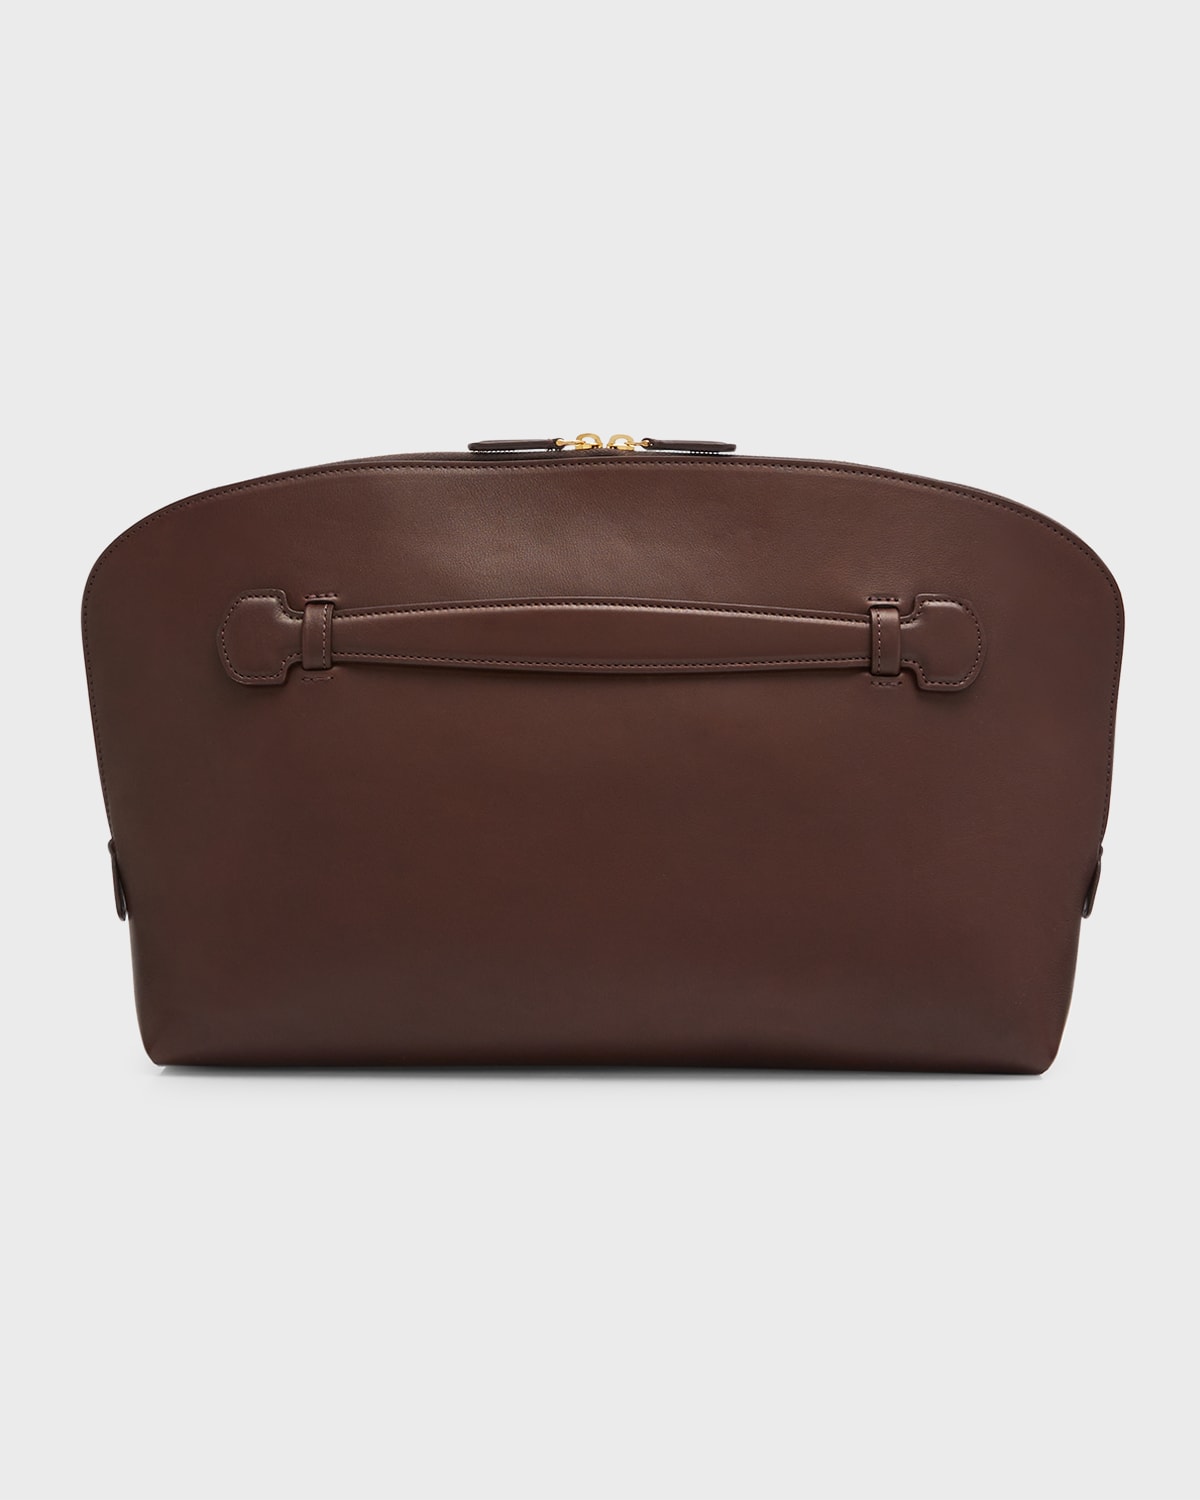 THE ROW ELLIE CLUTCH BAG IN SADDLE LEATHER